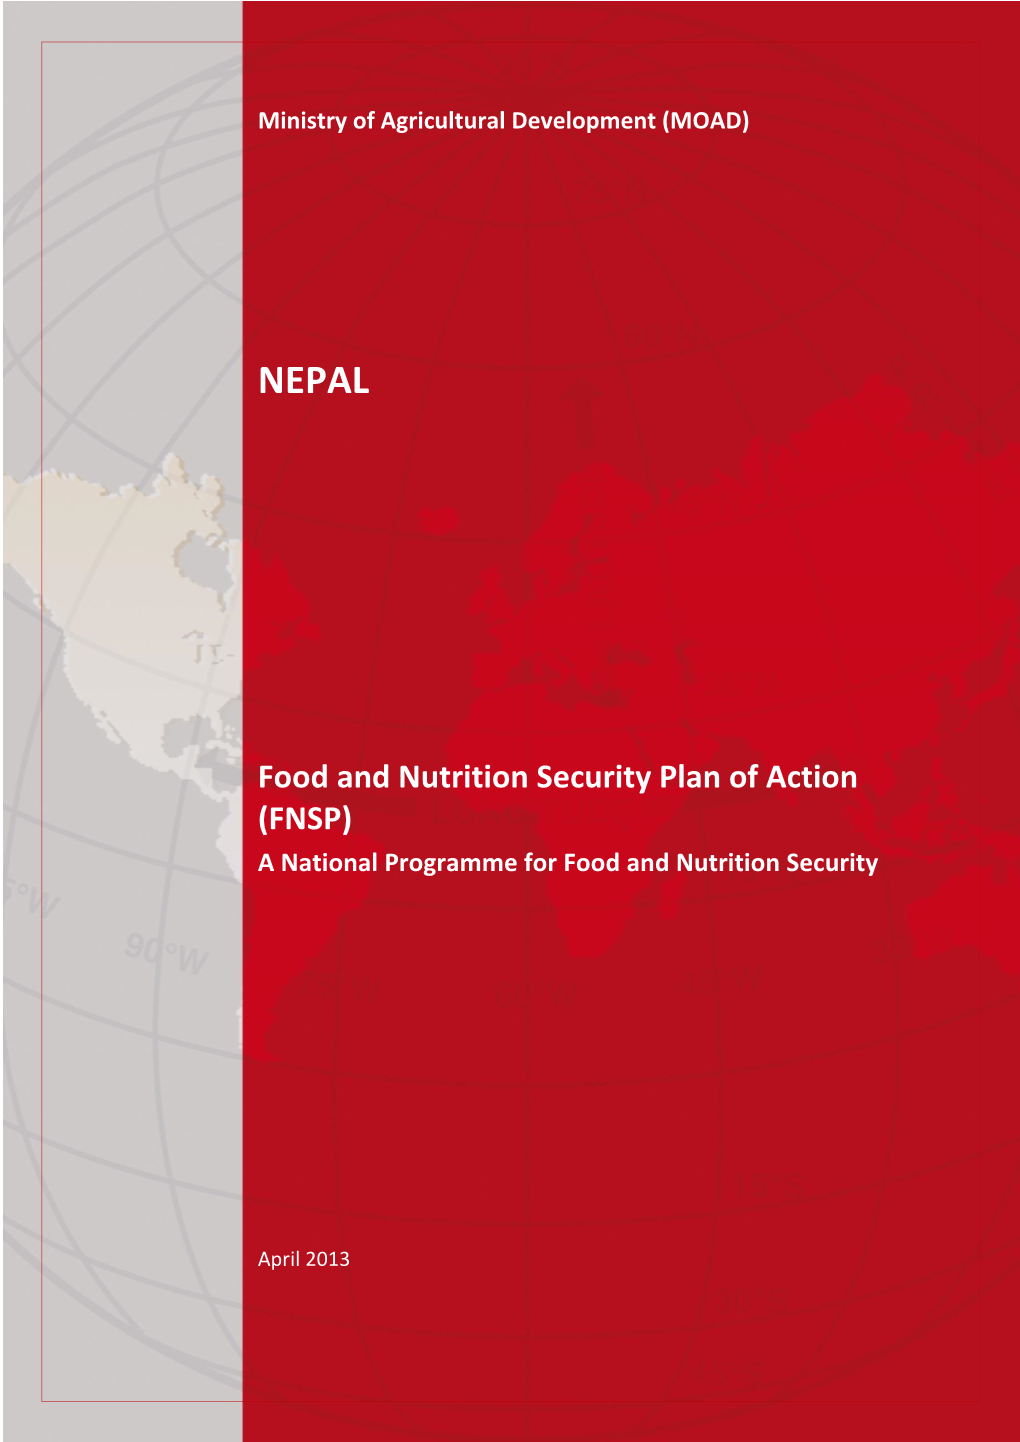 Food and Nutrition Security Plan of Action (FNSP) a National Programme for Food and Nutrition Security